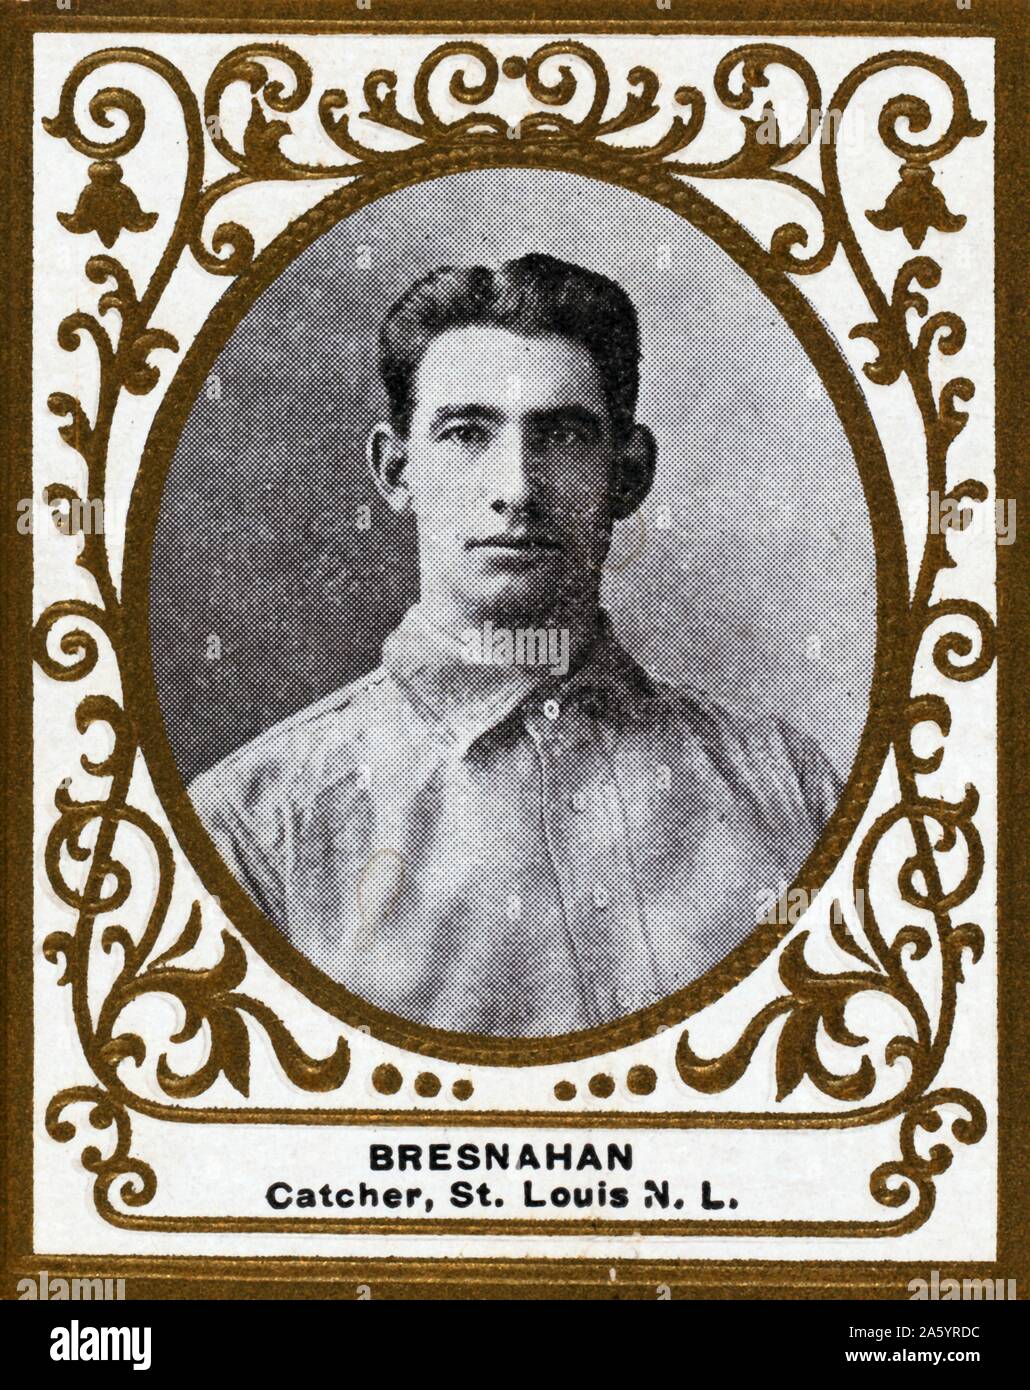 Roger Bresnahan, St. Louis Cardinals, baseball card portrait. Card set : Ramly Cigarettes. Issued by American Tobacco Company. Stock Photo